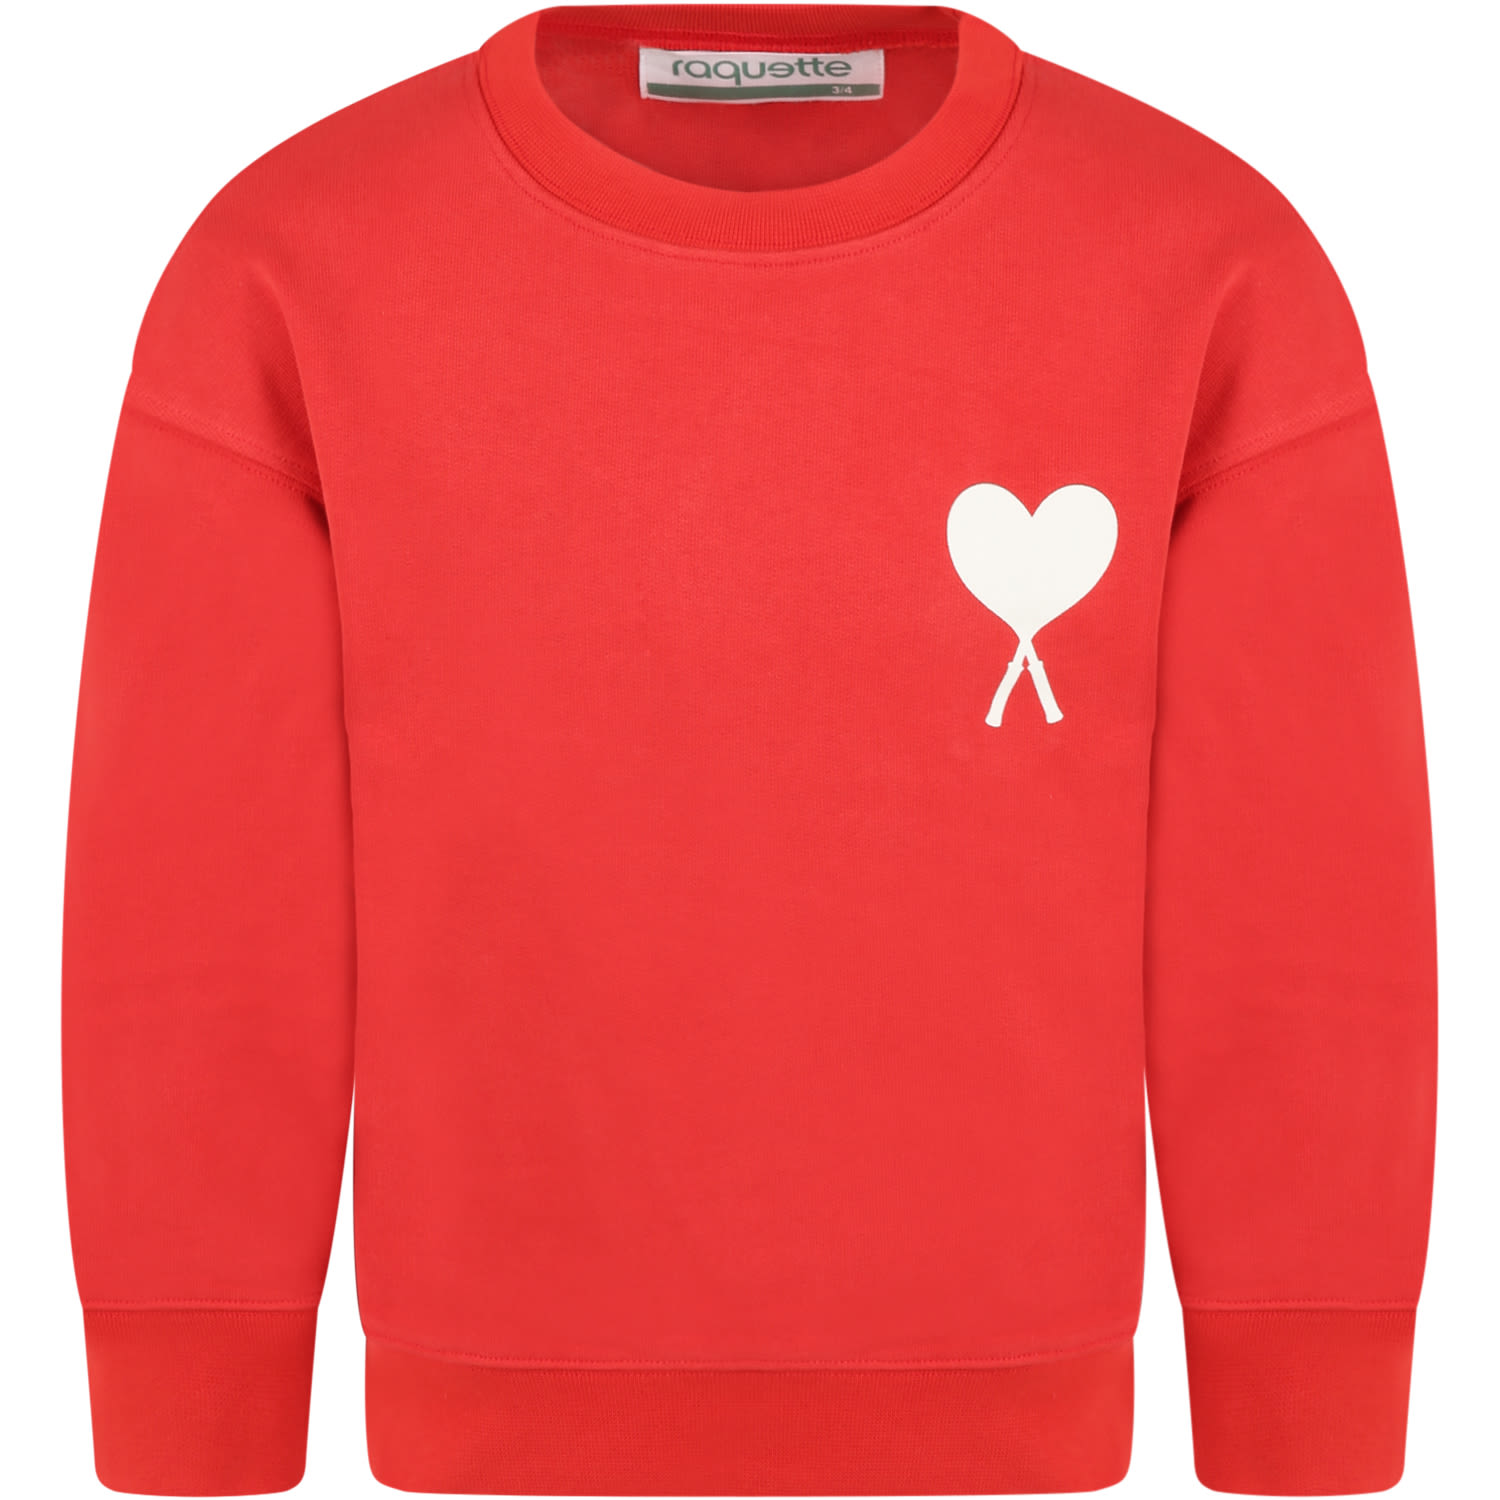 Raquette Red Sweatshirt For Kids With Rackets